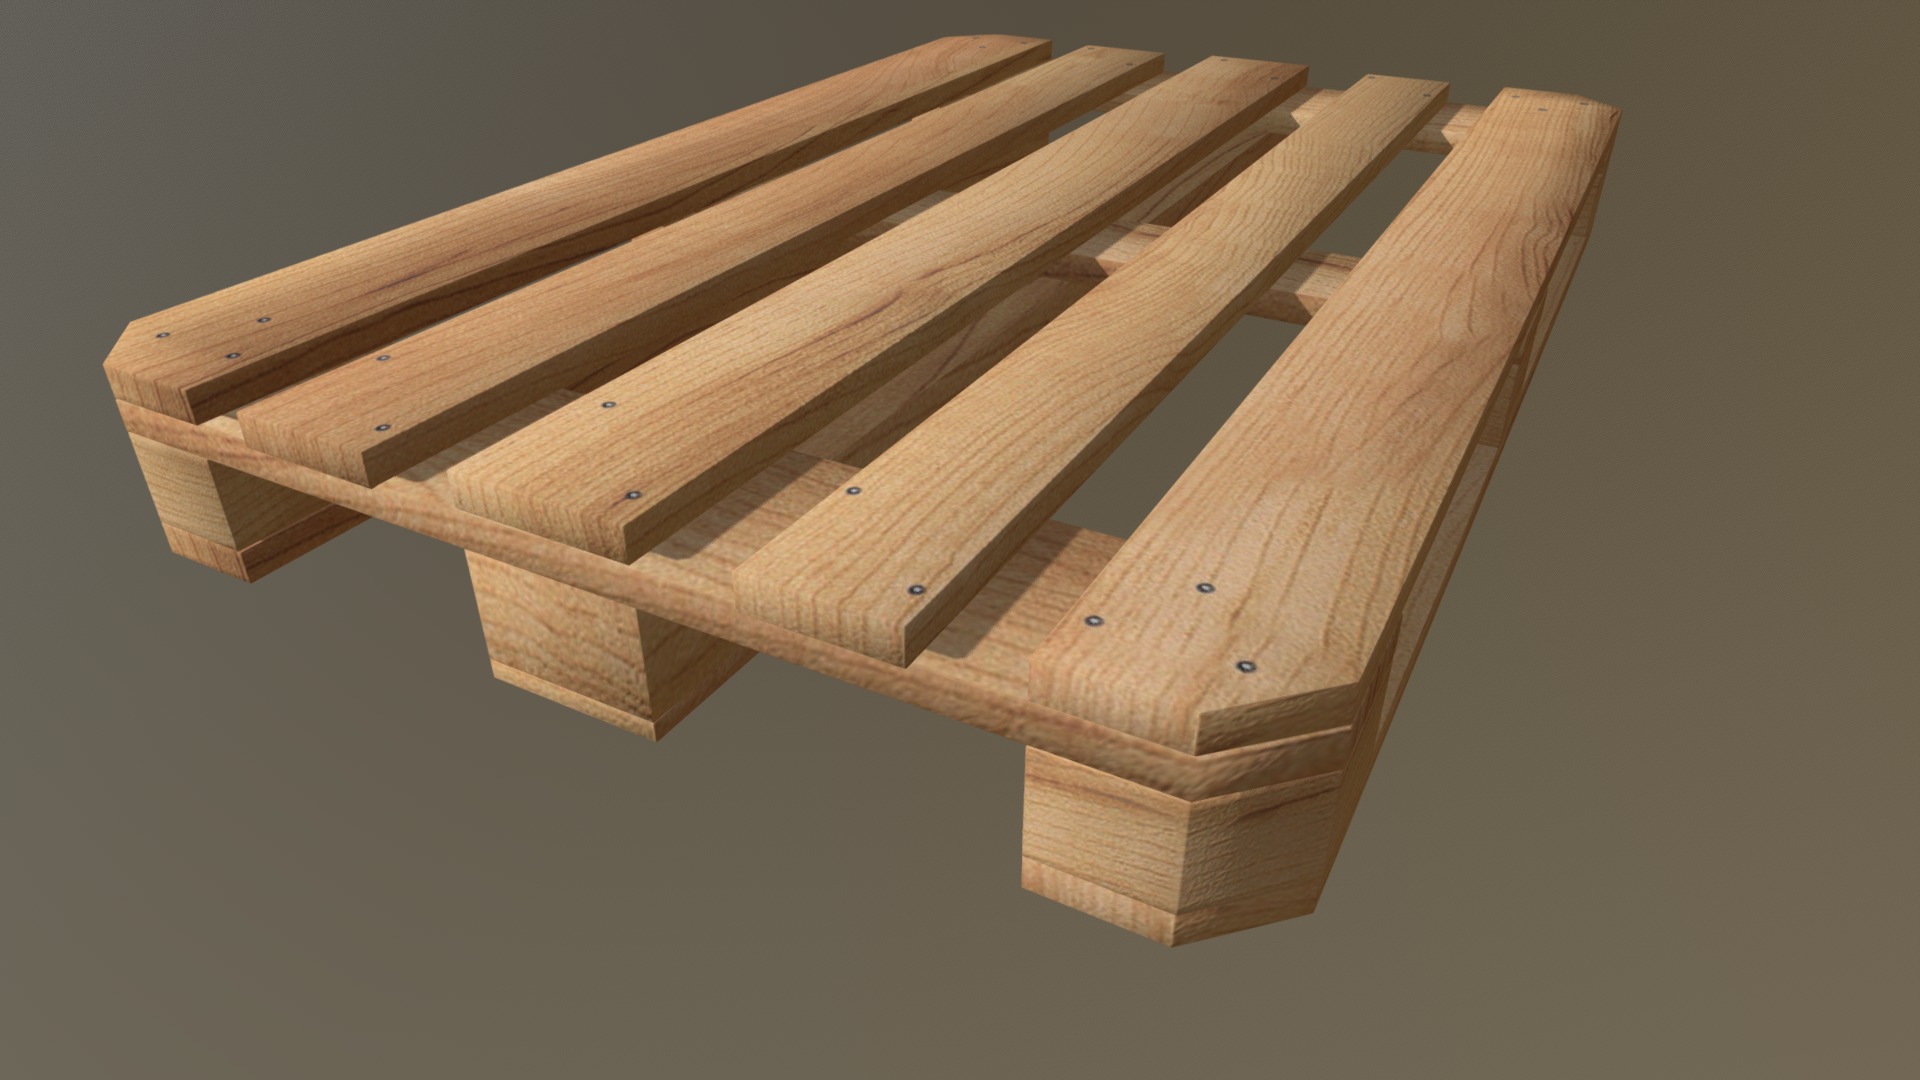 3D model wooden pallet - This is a 3D model of the wooden pallet. The 3D model is about a wooden bench with a black background.